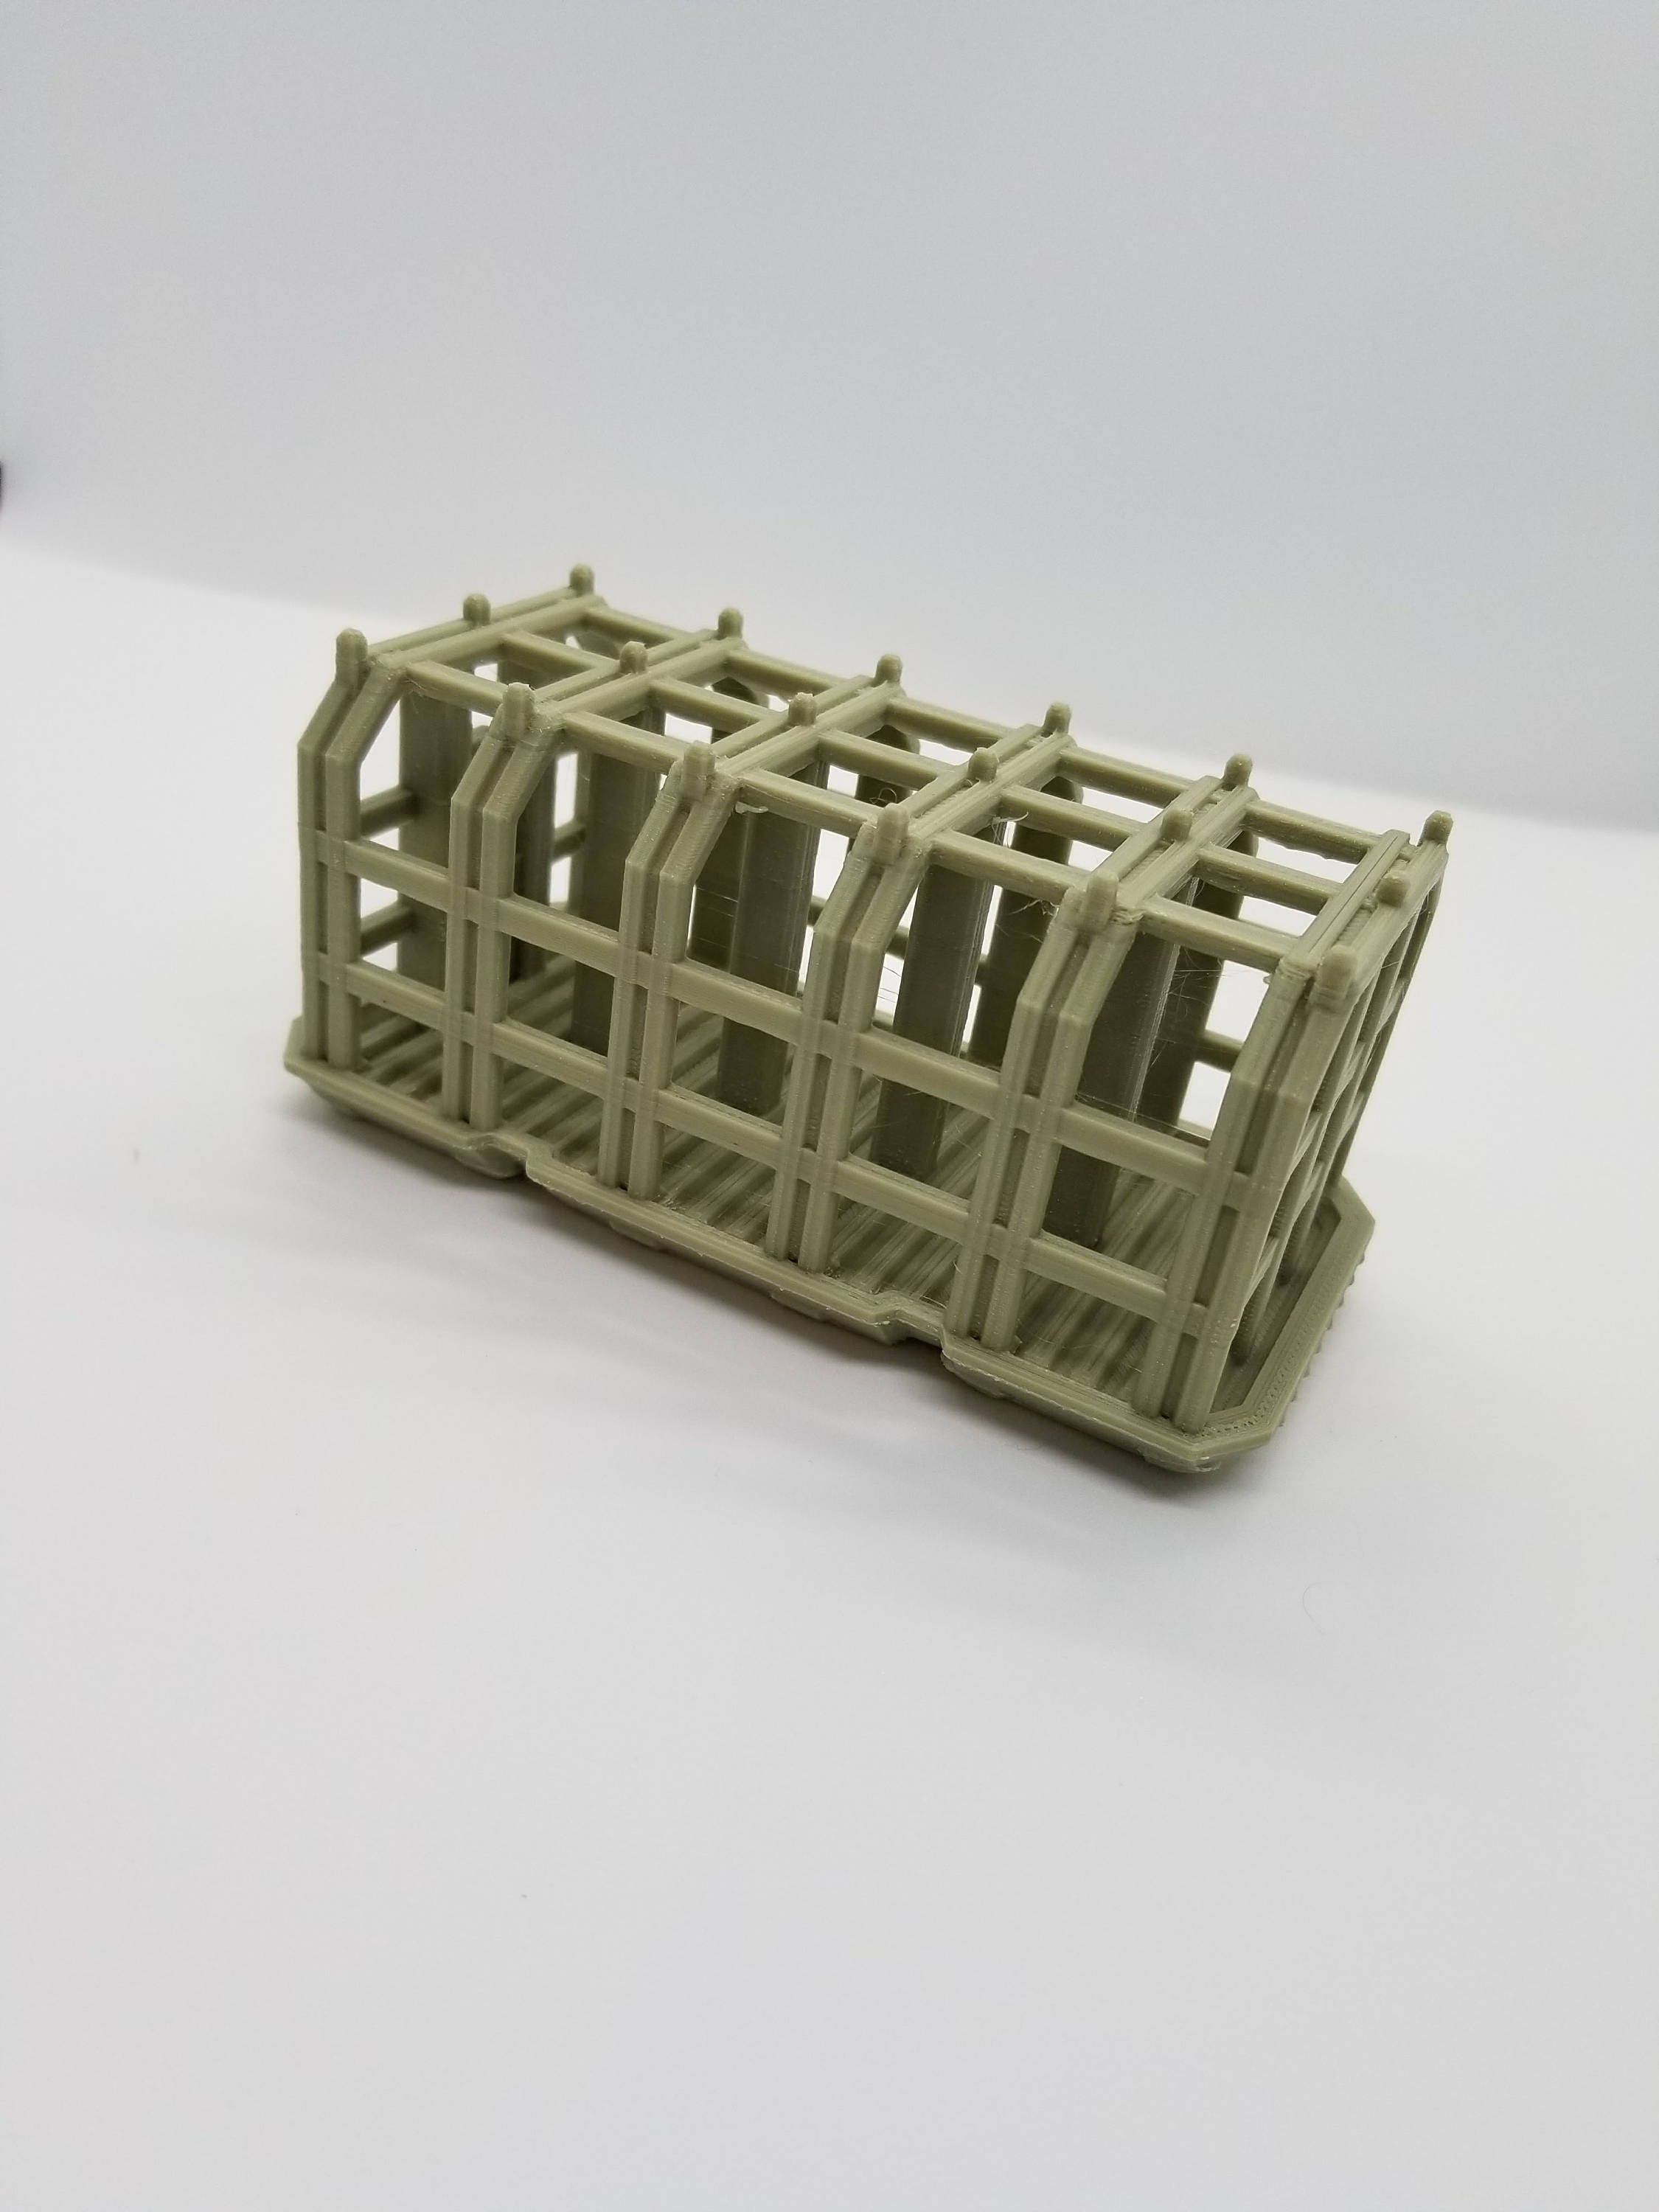 Warlayer / 3d Printed Sci-Fi Containment Crate / 28mm Wargaming Terrain / Print to Order / Licensed Printer